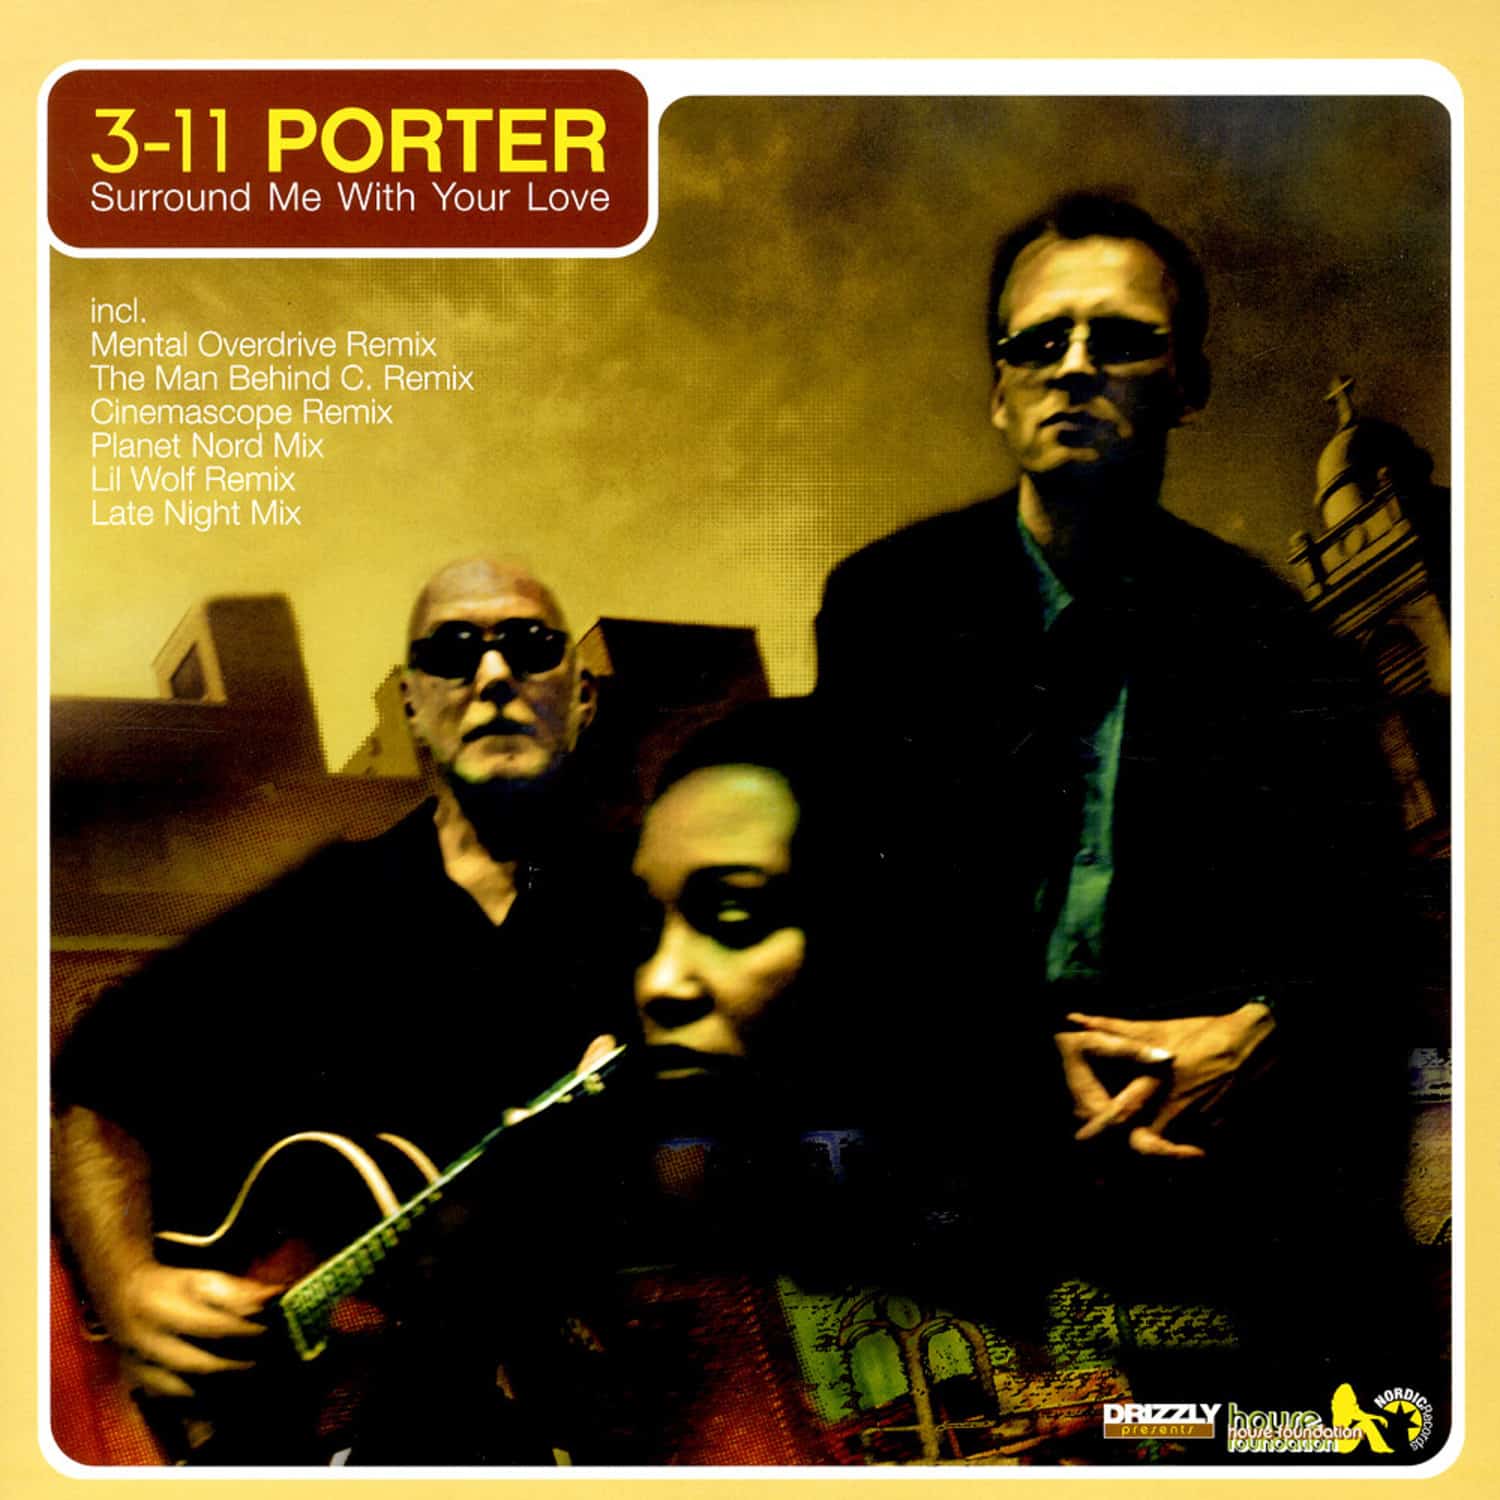 3-11 Porter - SURROUND ME WITH YOUR LOVE